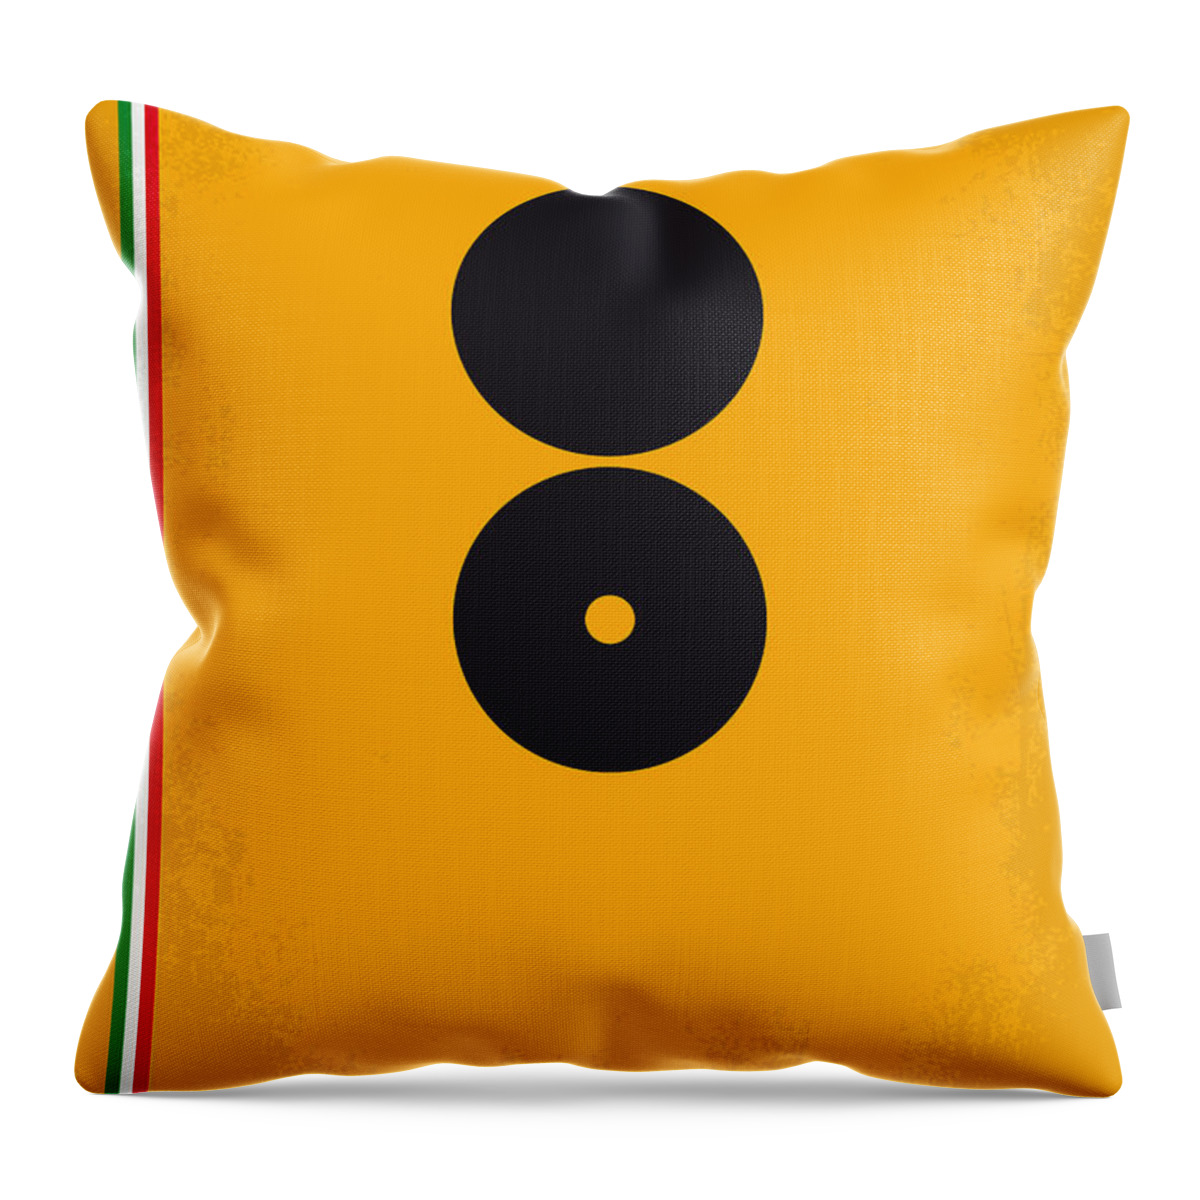 The American Throw Pillow featuring the digital art No088 My The American minimal movie poster by Chungkong Art